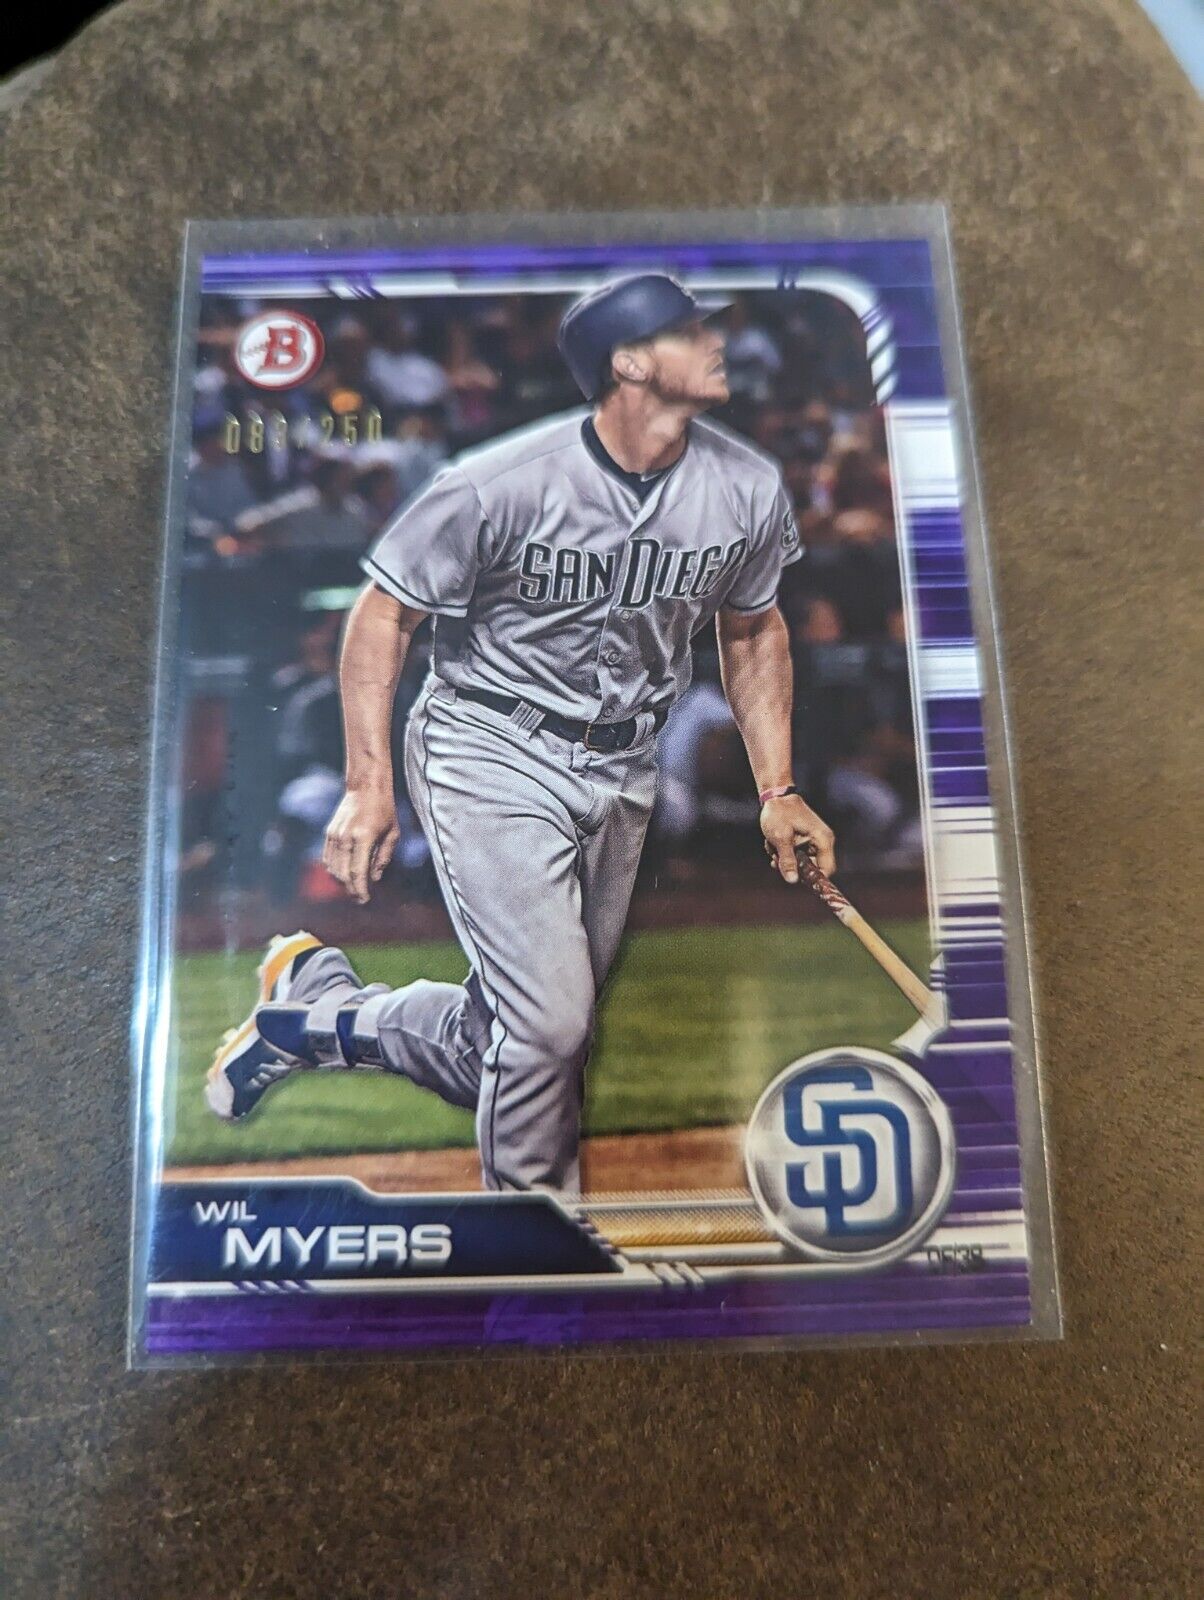 2019 Bowman Purple Paper Wil Myers /250 #99 San Diego Padres Baseball Card